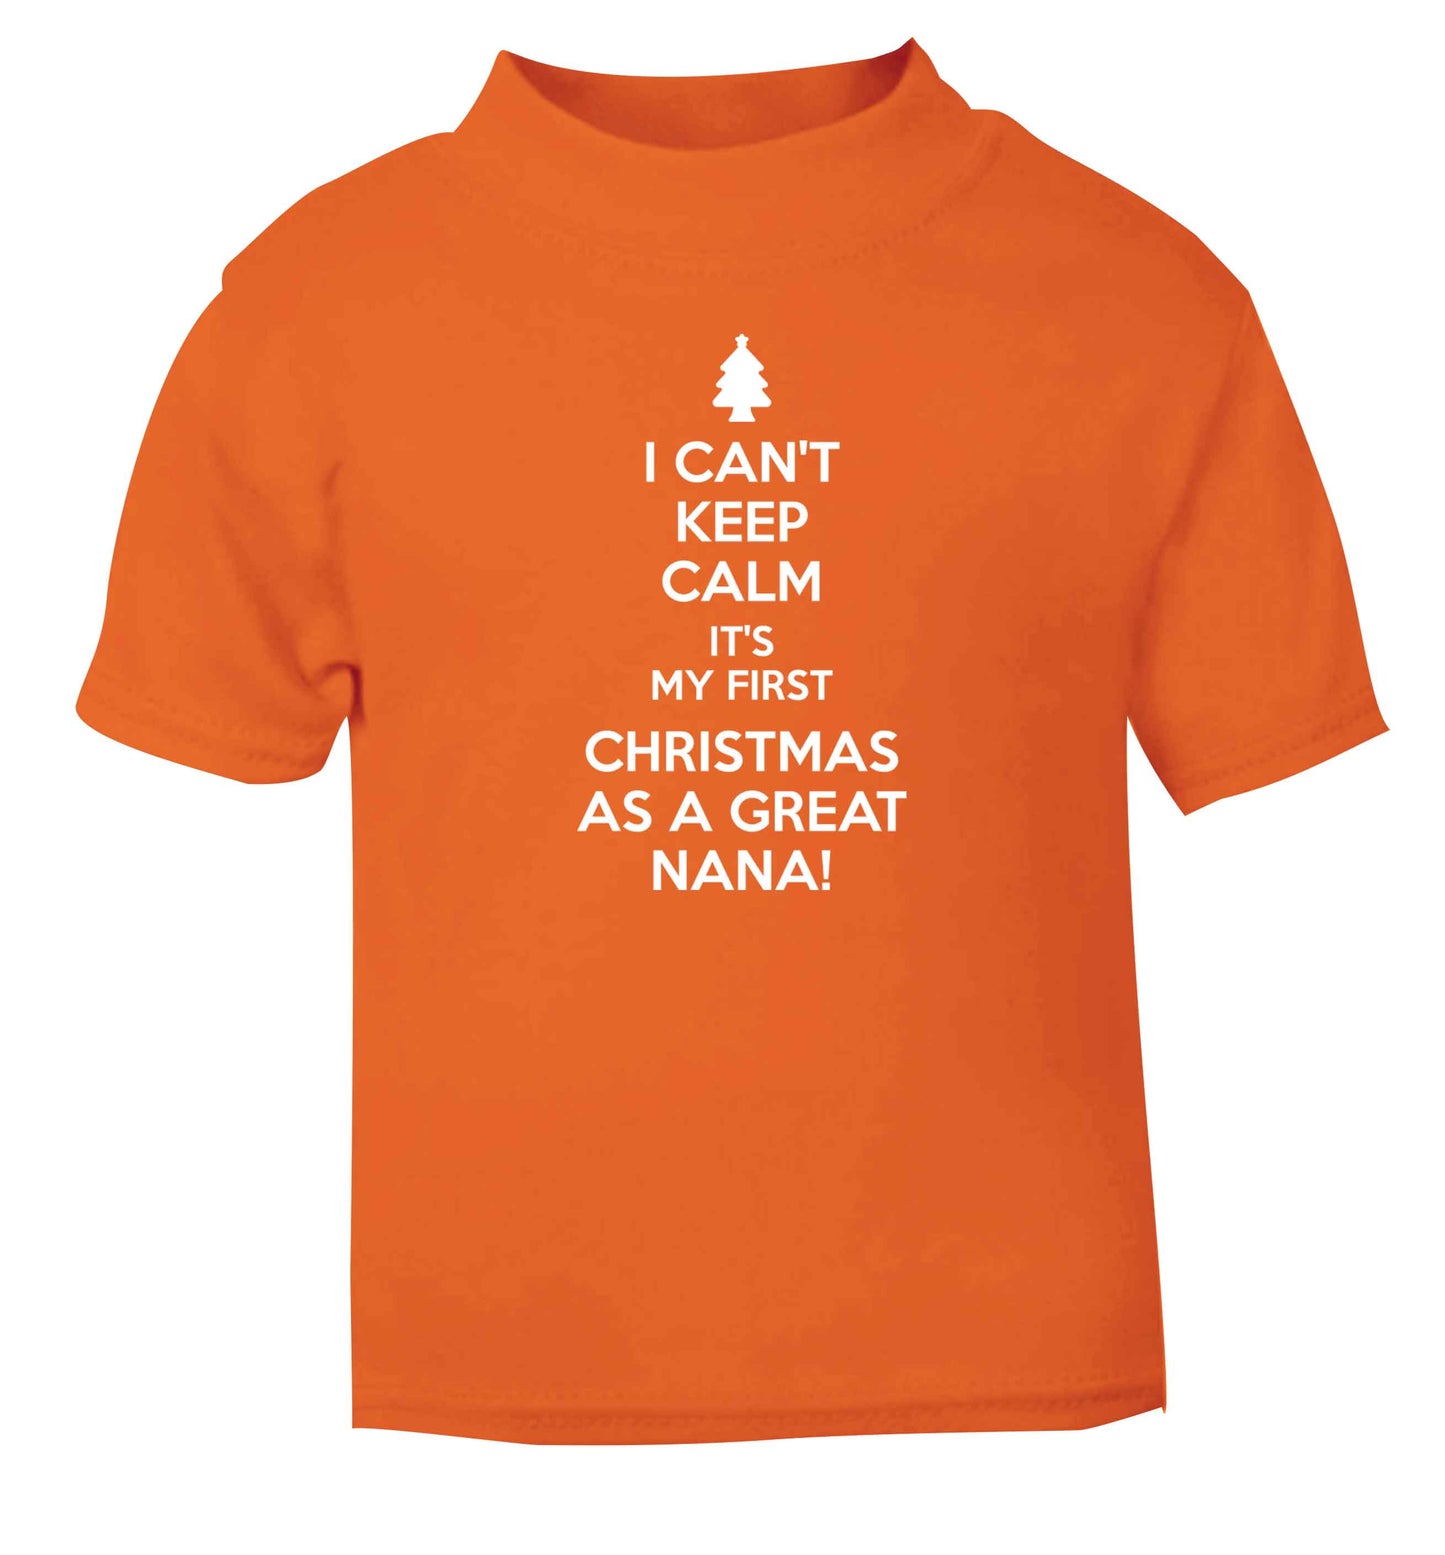 I can't keep calm it's my first Christmas as a great nana! orange Baby Toddler Tshirt 2 Years